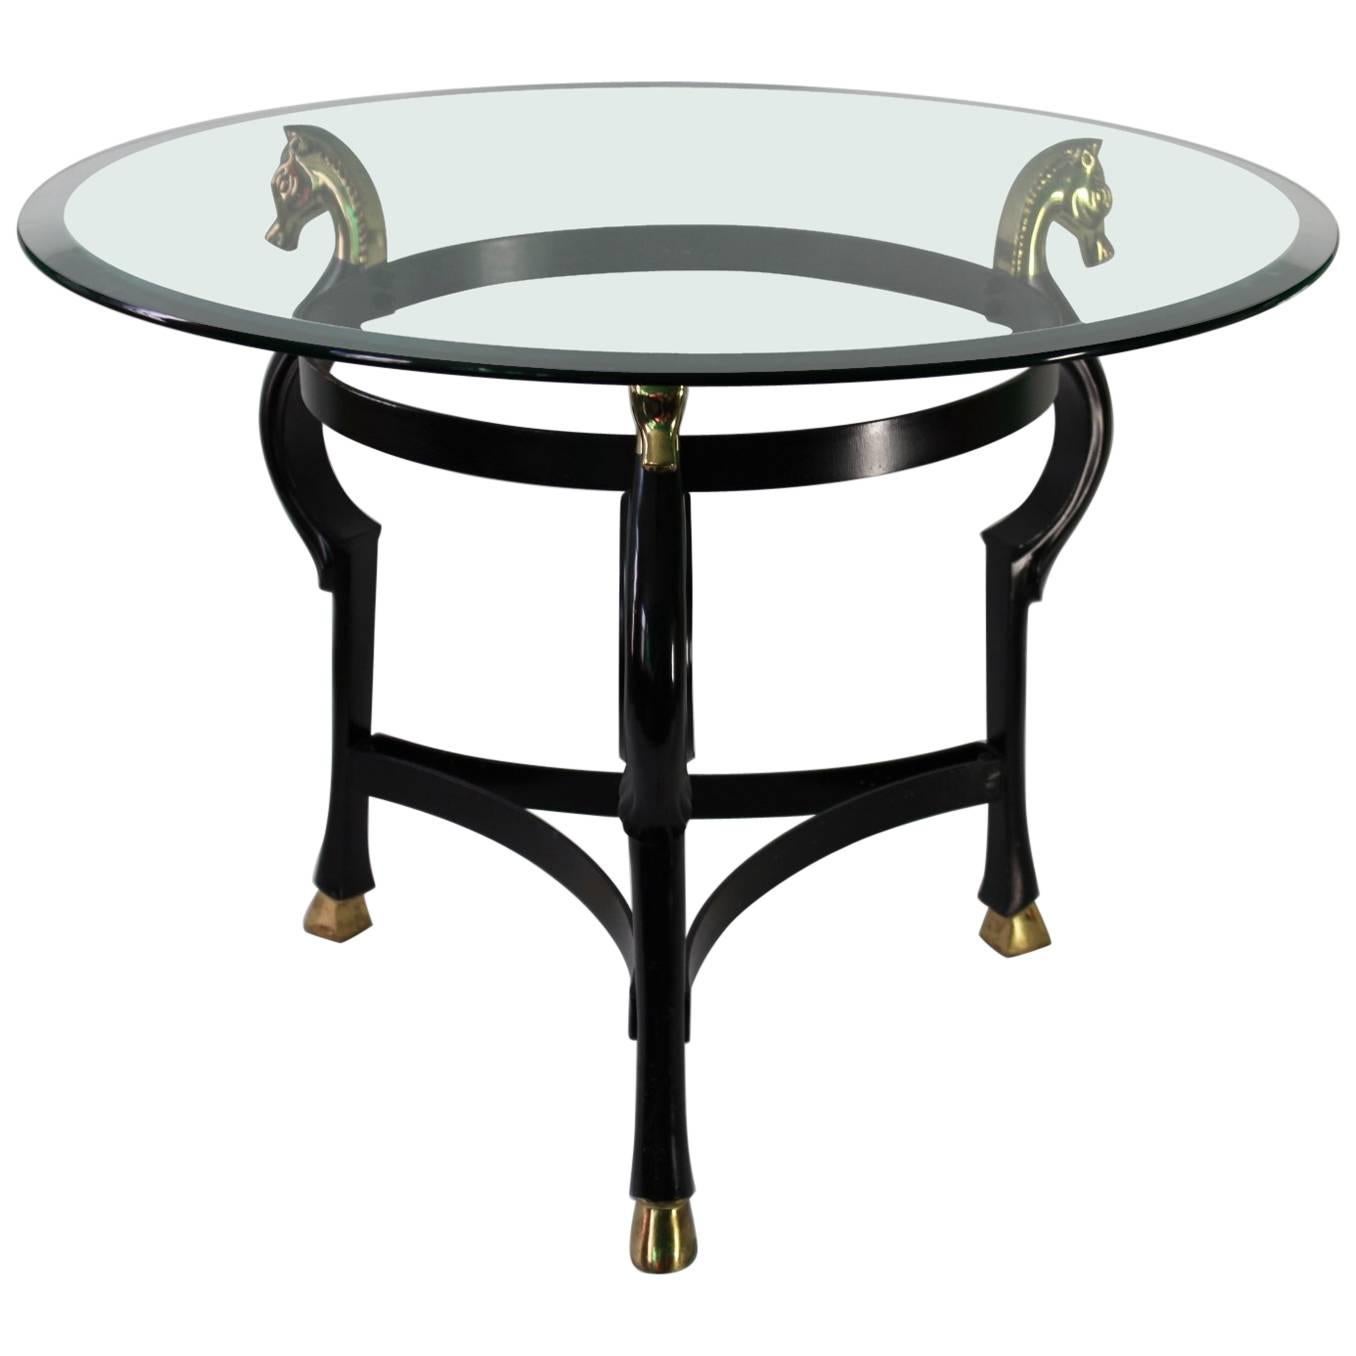 Midcentury Round End Table in Ebonized Brass with Seahorse Motif